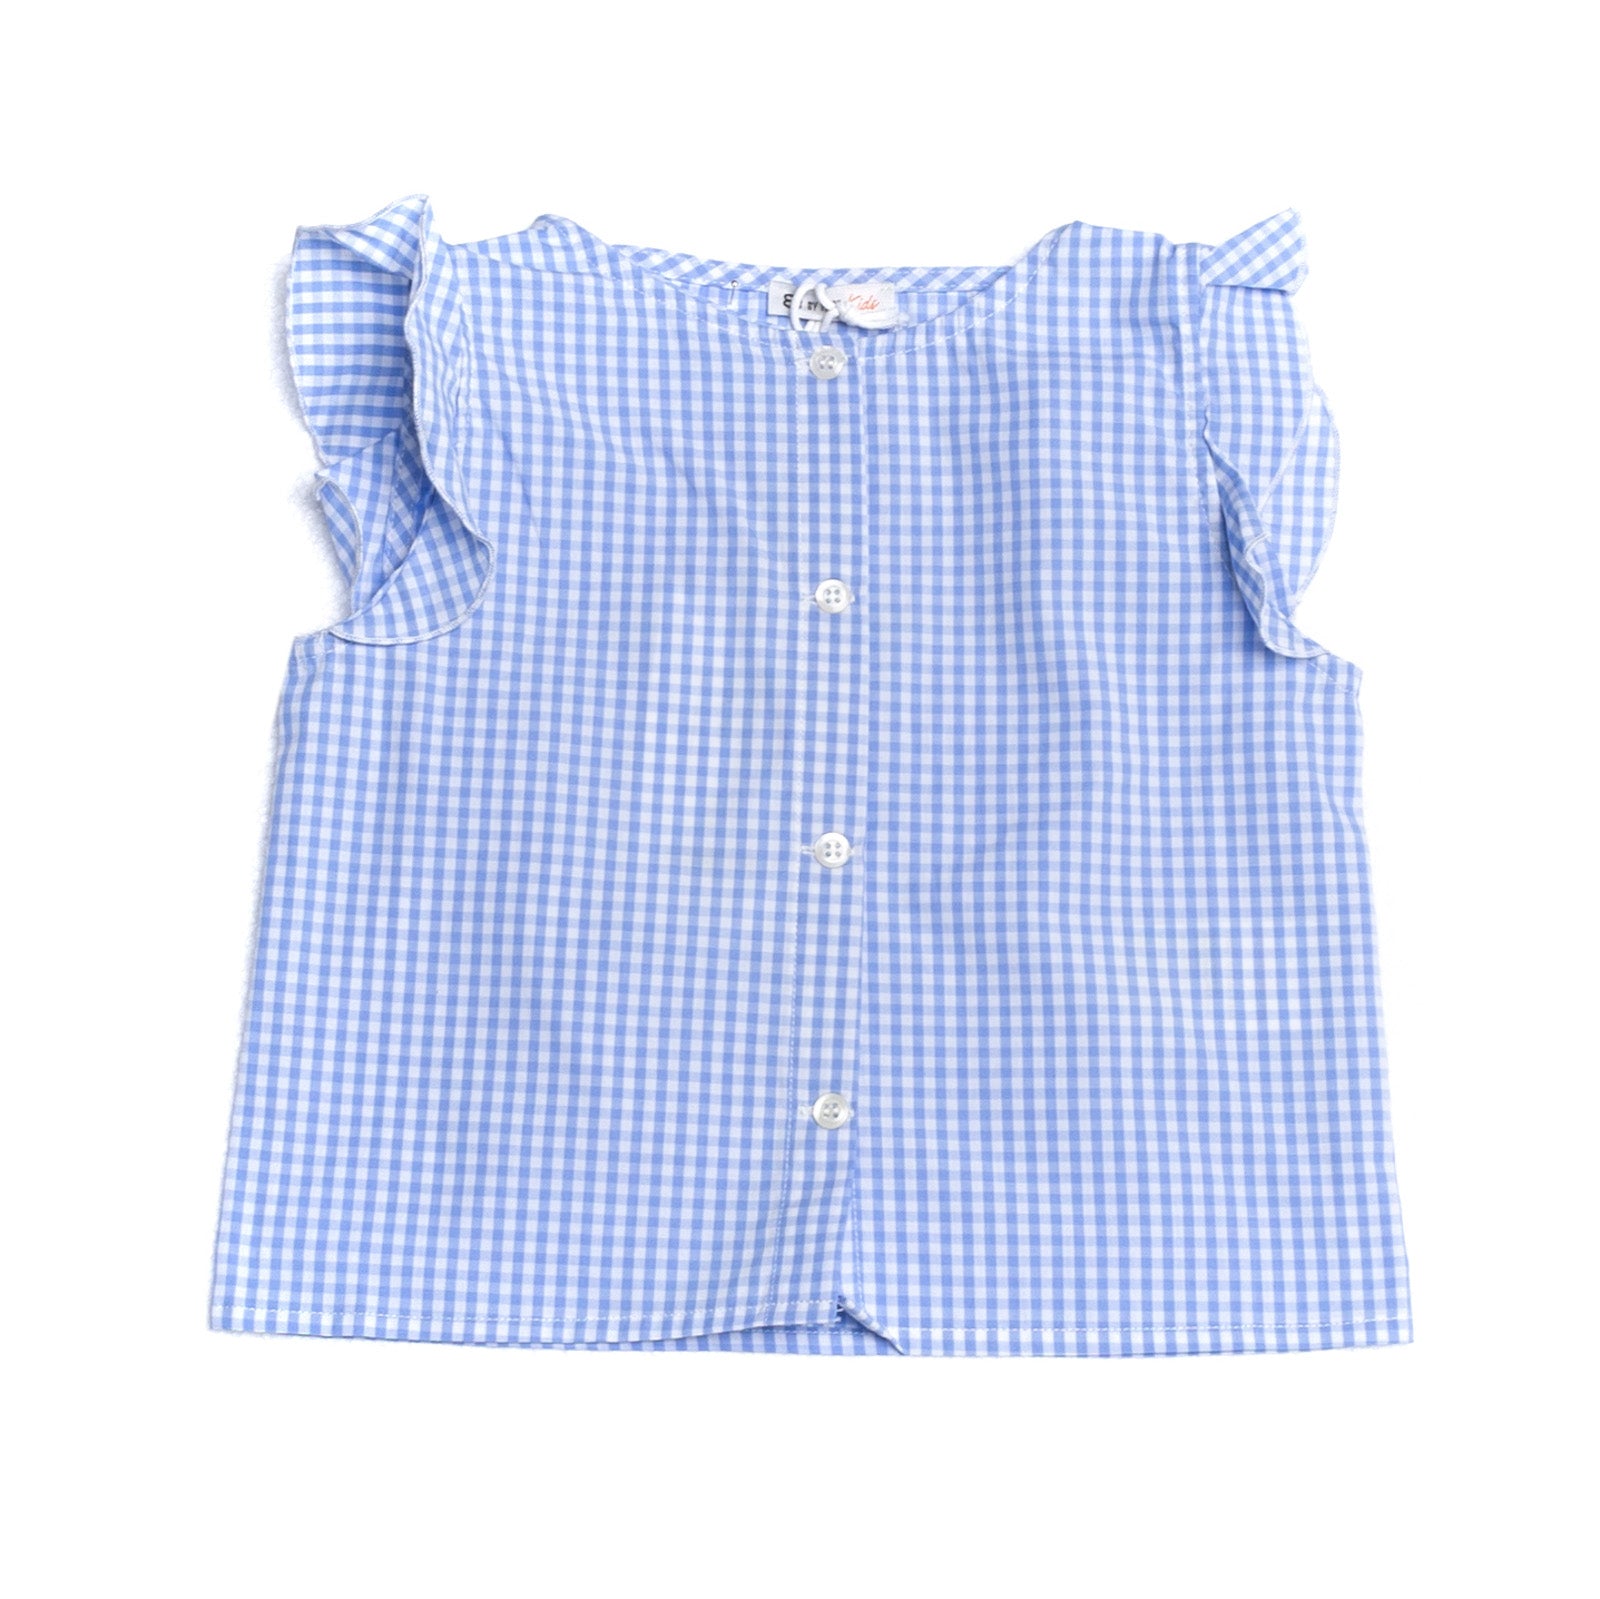 8 KIDS Top Blouse Size 5Y Gingham Pattern Ruffle Trim Made in Italy gallery main photo